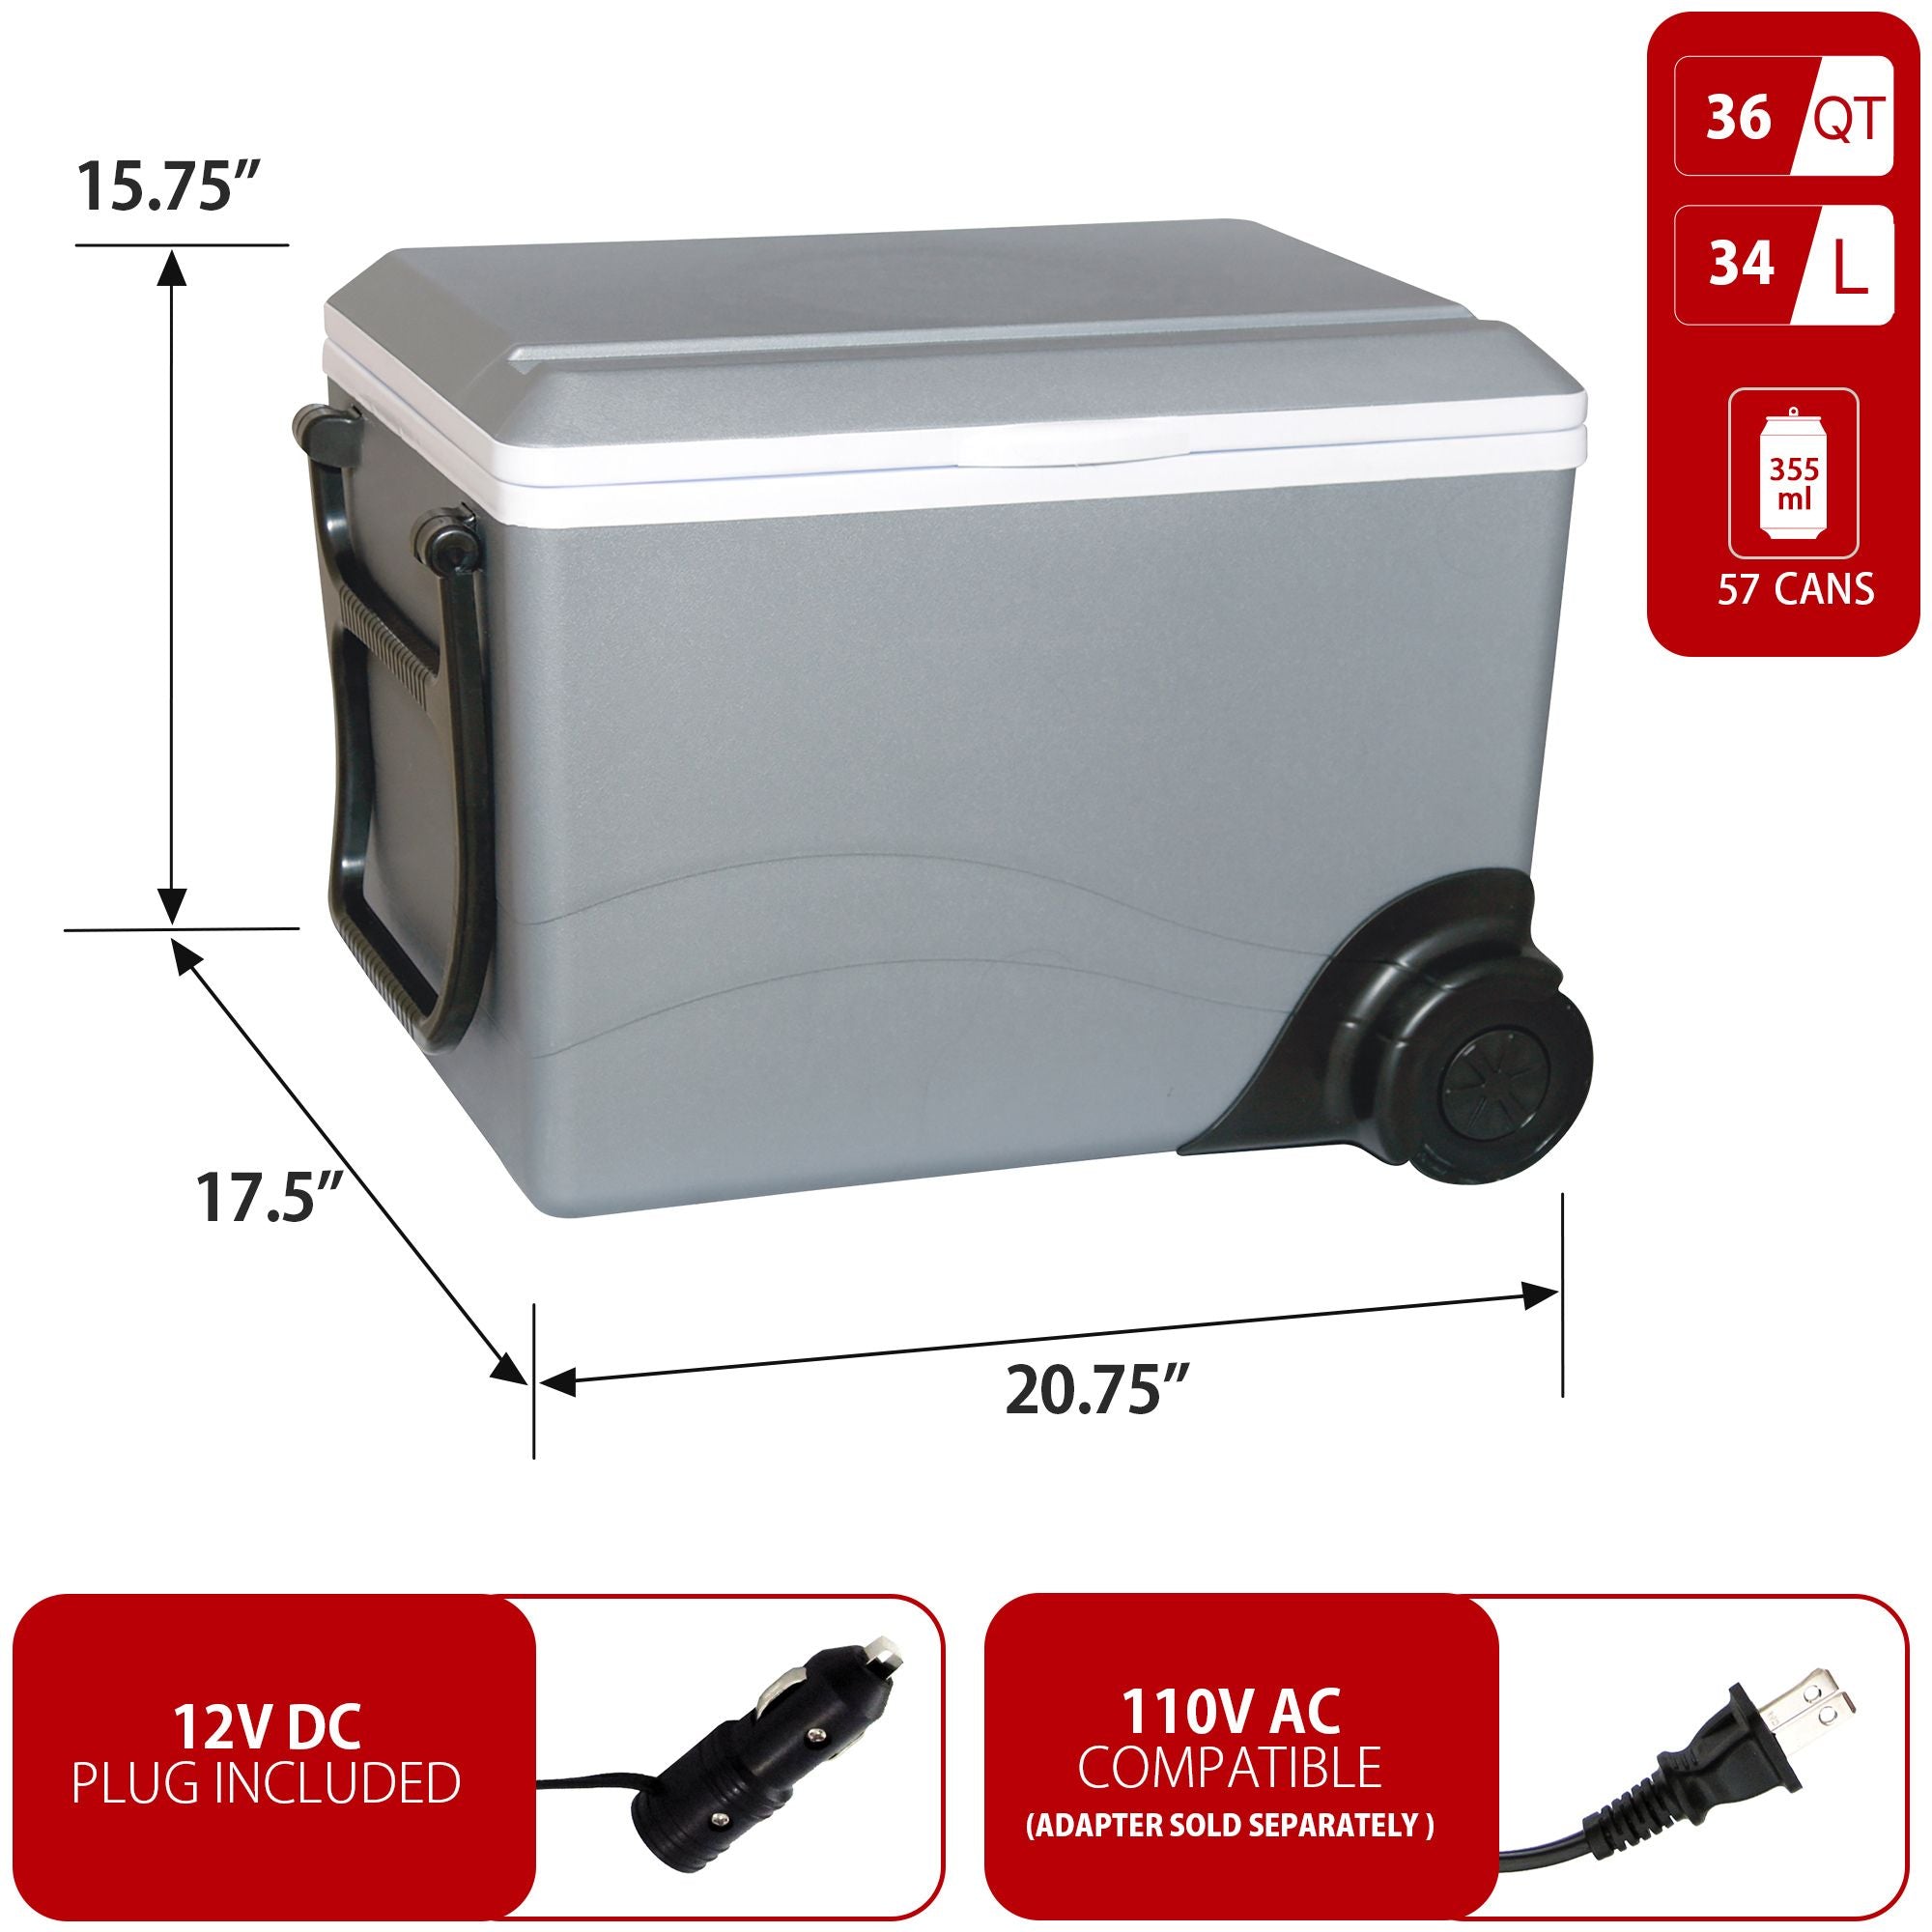 Koolatron 12V wheeled travel fridge/warmer, closed on a white background with dimensions and capacity labeled. Two inset images below show power adapters with text reading "12V DC plug included; AC compatible (adapter sold separately)"